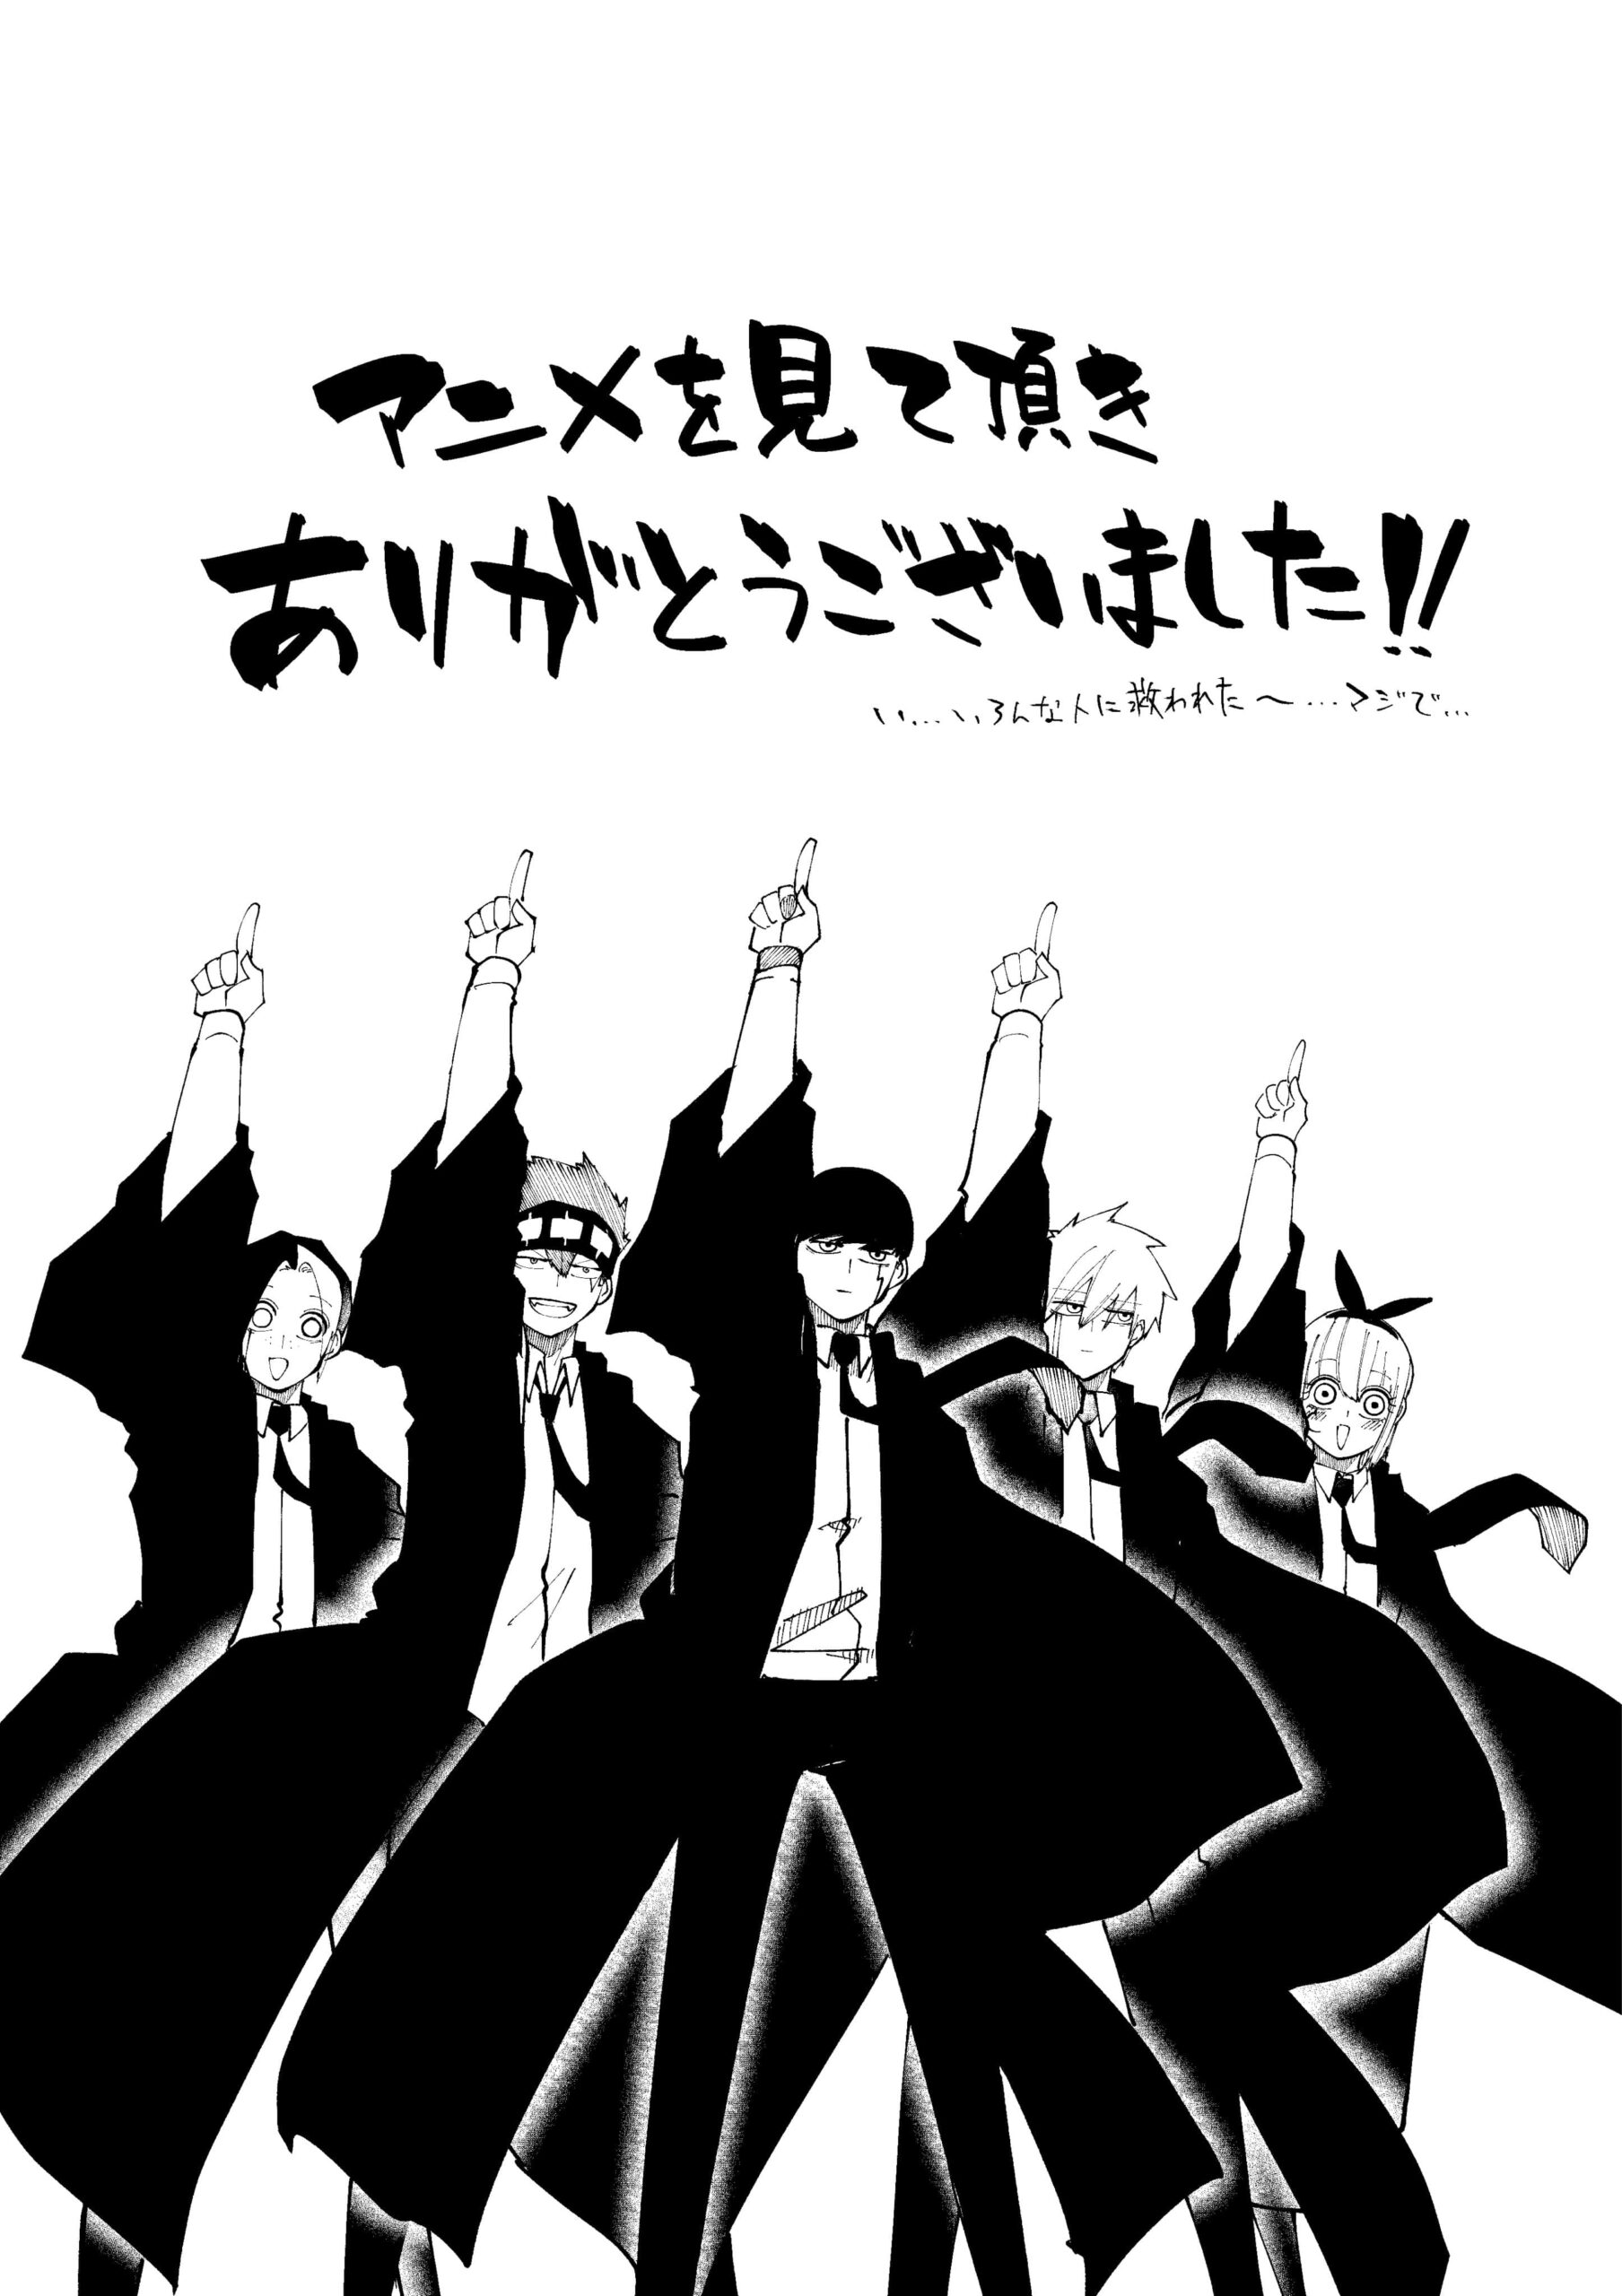 An illustration from the original mangaka, Hajime Komoto, received at the end of the second season broadcast of the anime.